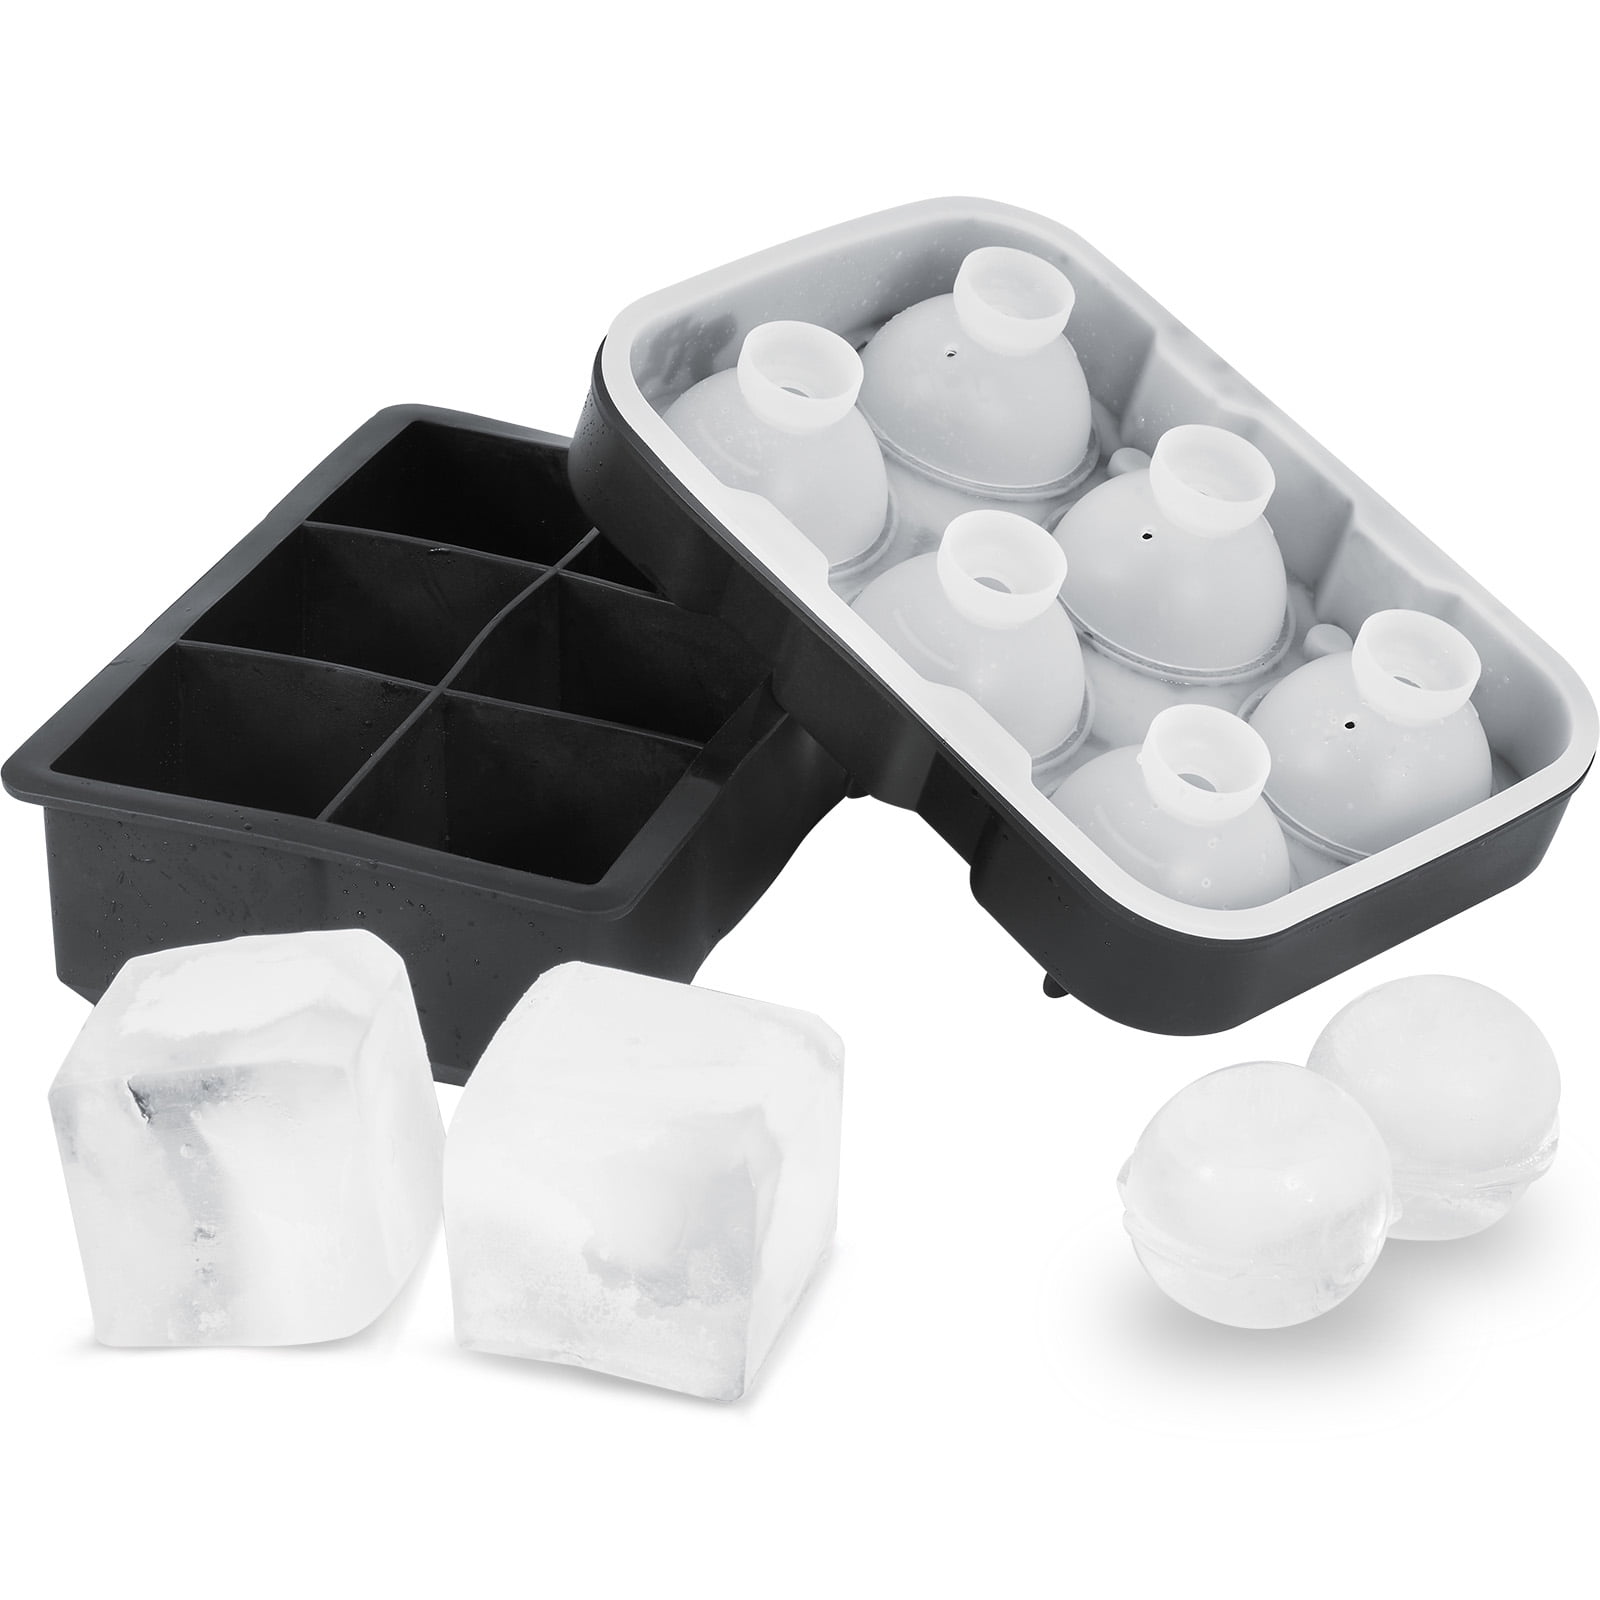 Tovolo King Cube Oyster Gray Silicone Ice Tray